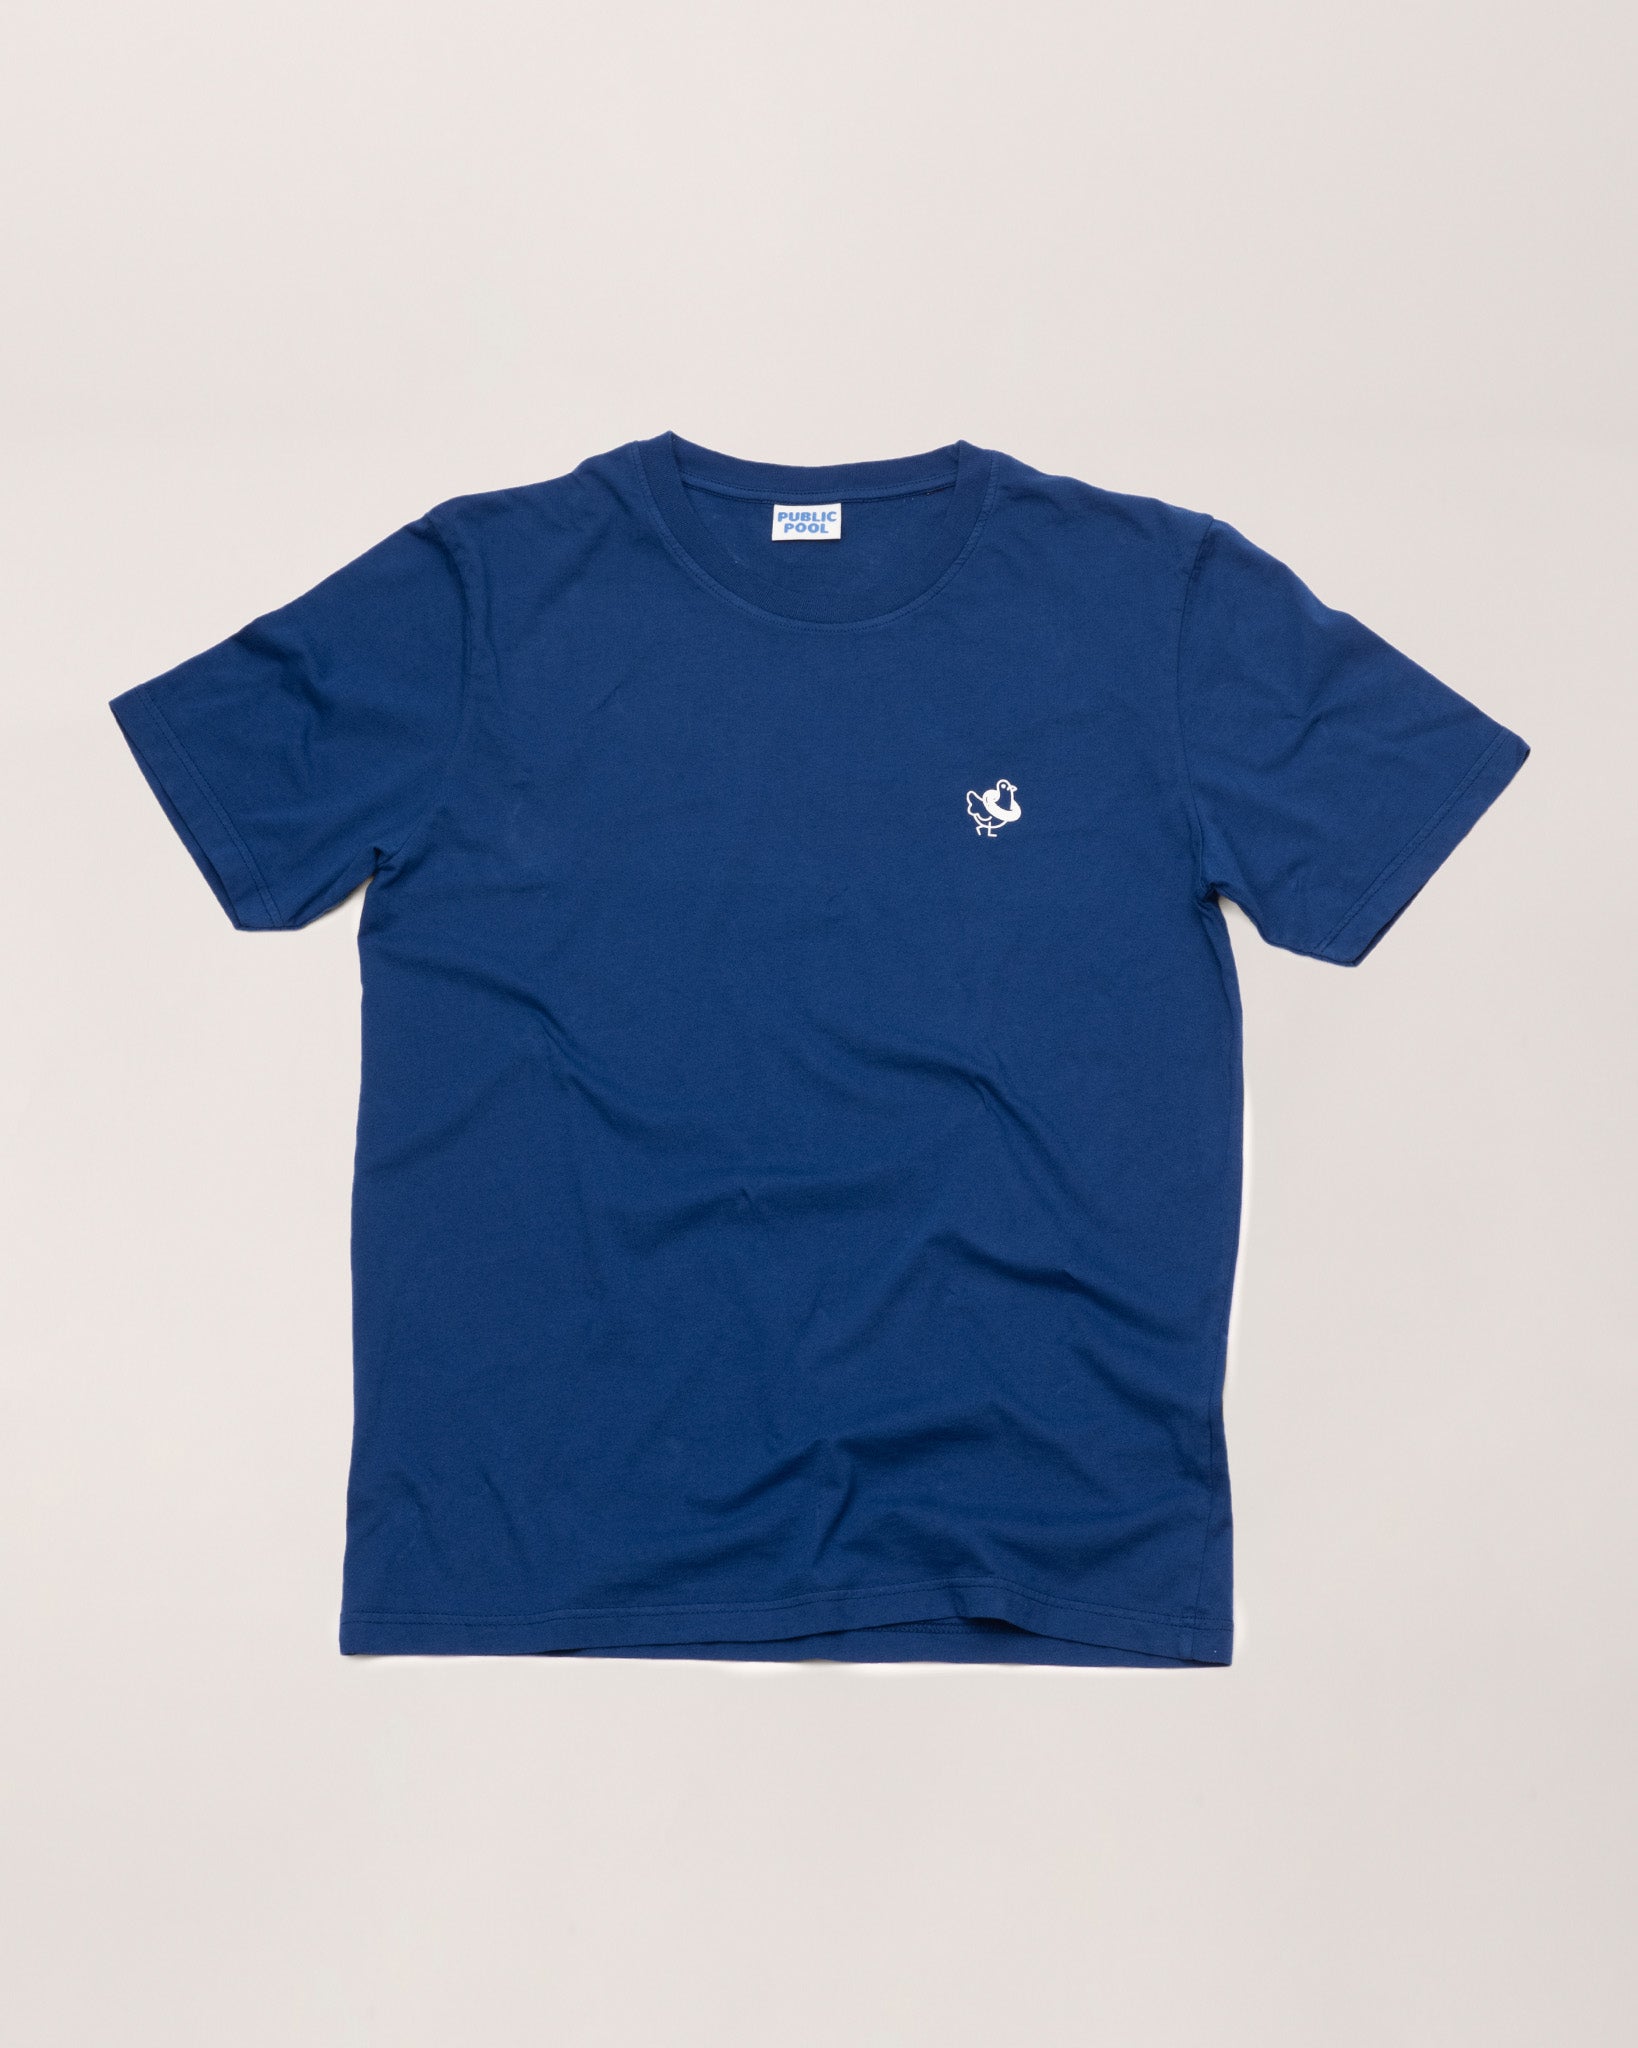 A blue shirt with a white Public Pool icon. 